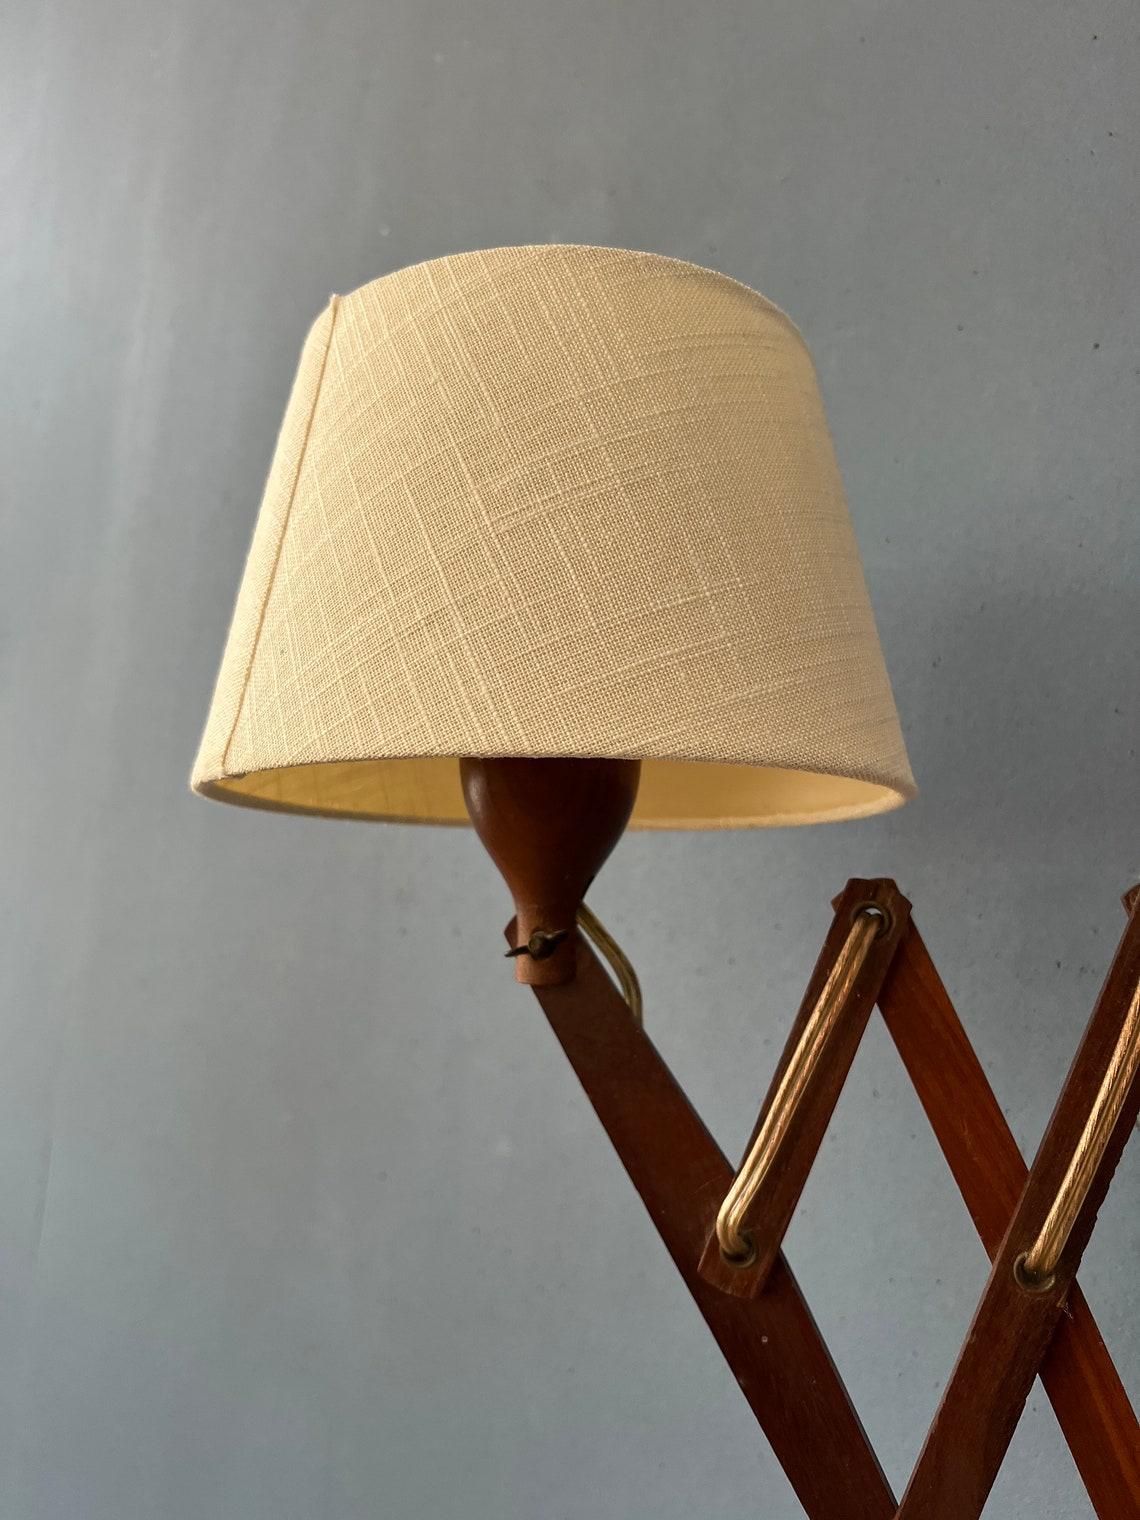 Teak Wood Scissor Wall Lamp with Beige Shade, 1970s For Sale 2